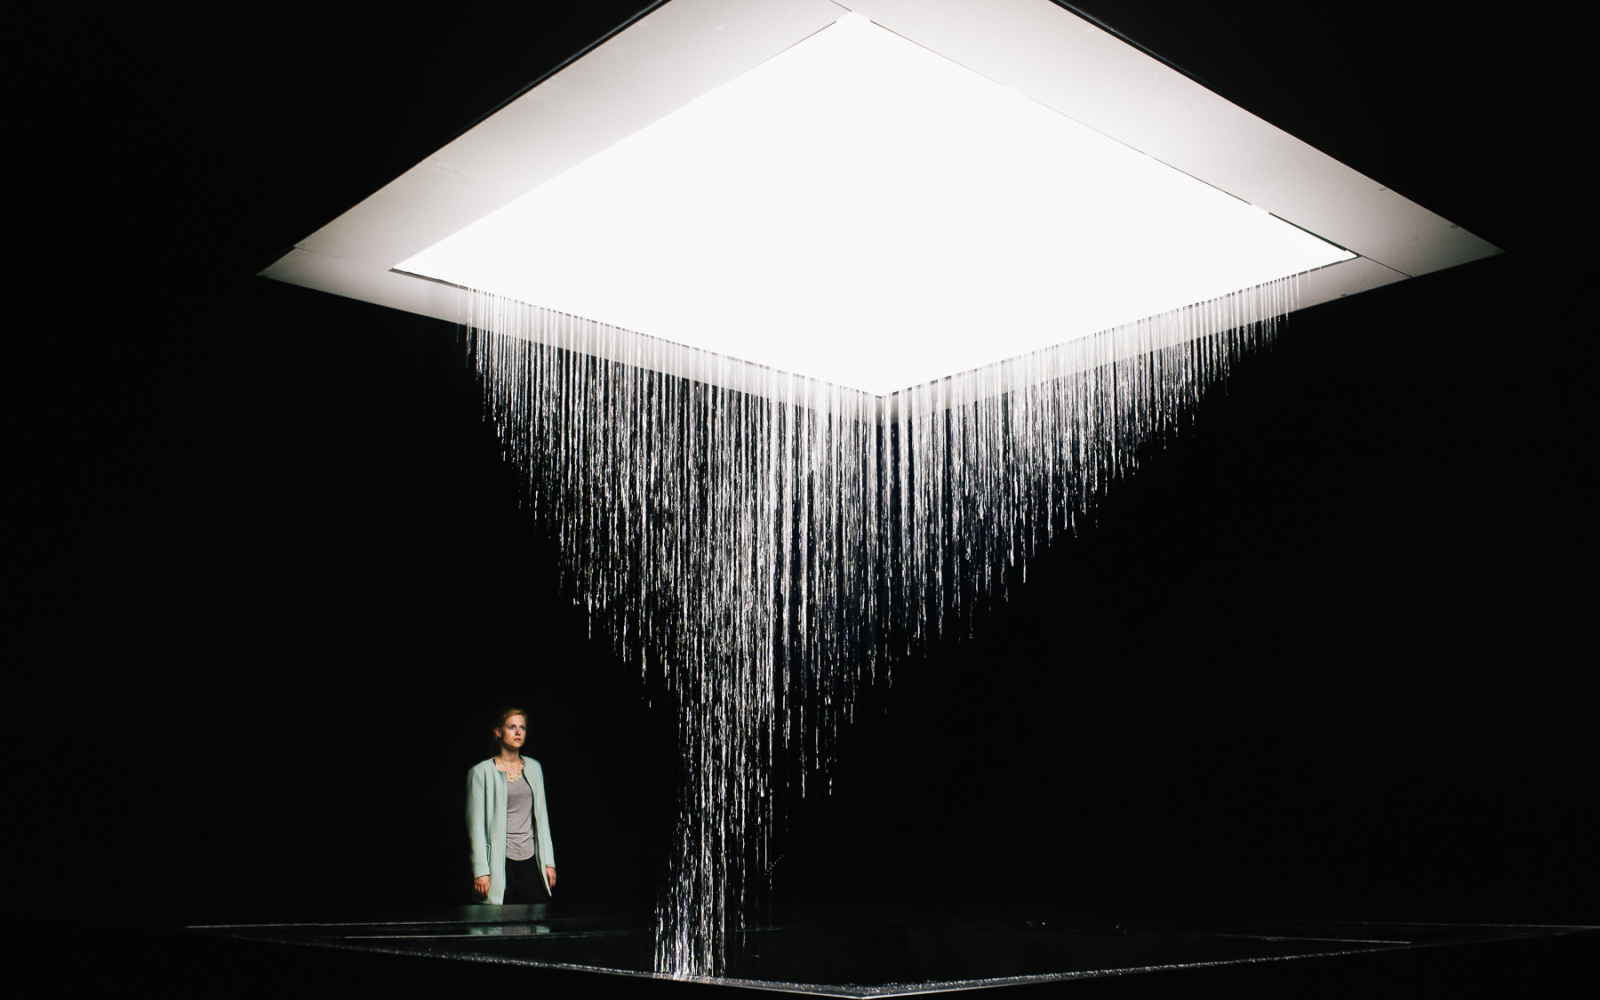 Photo of the installation 3D WATERMATRIX in which water falls to the ground and generates 3D shapes. A person is watching the insatallation.